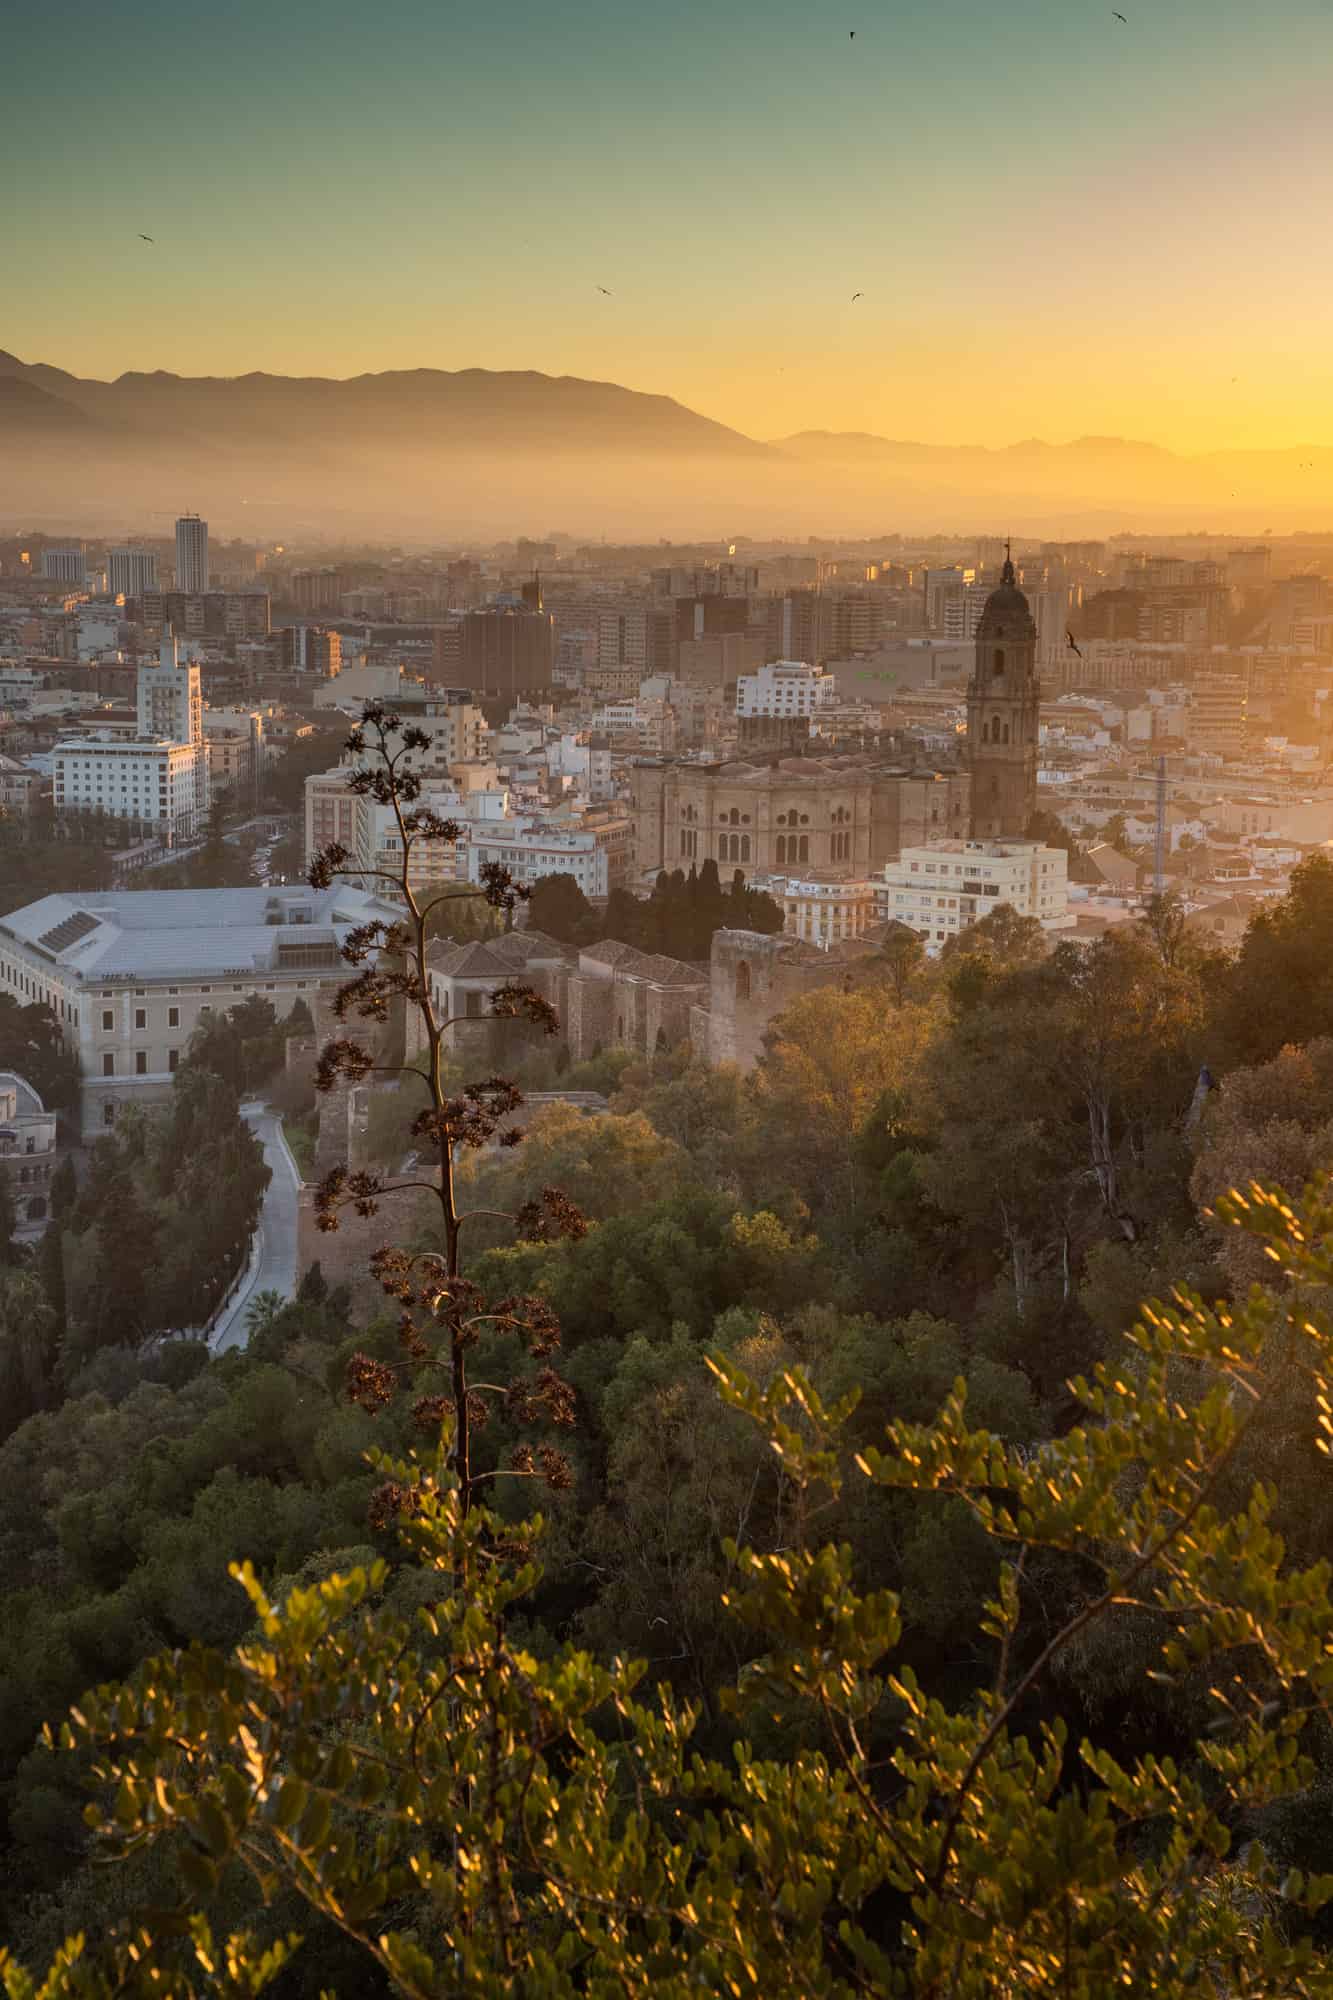 View over Malaga at sunset in March